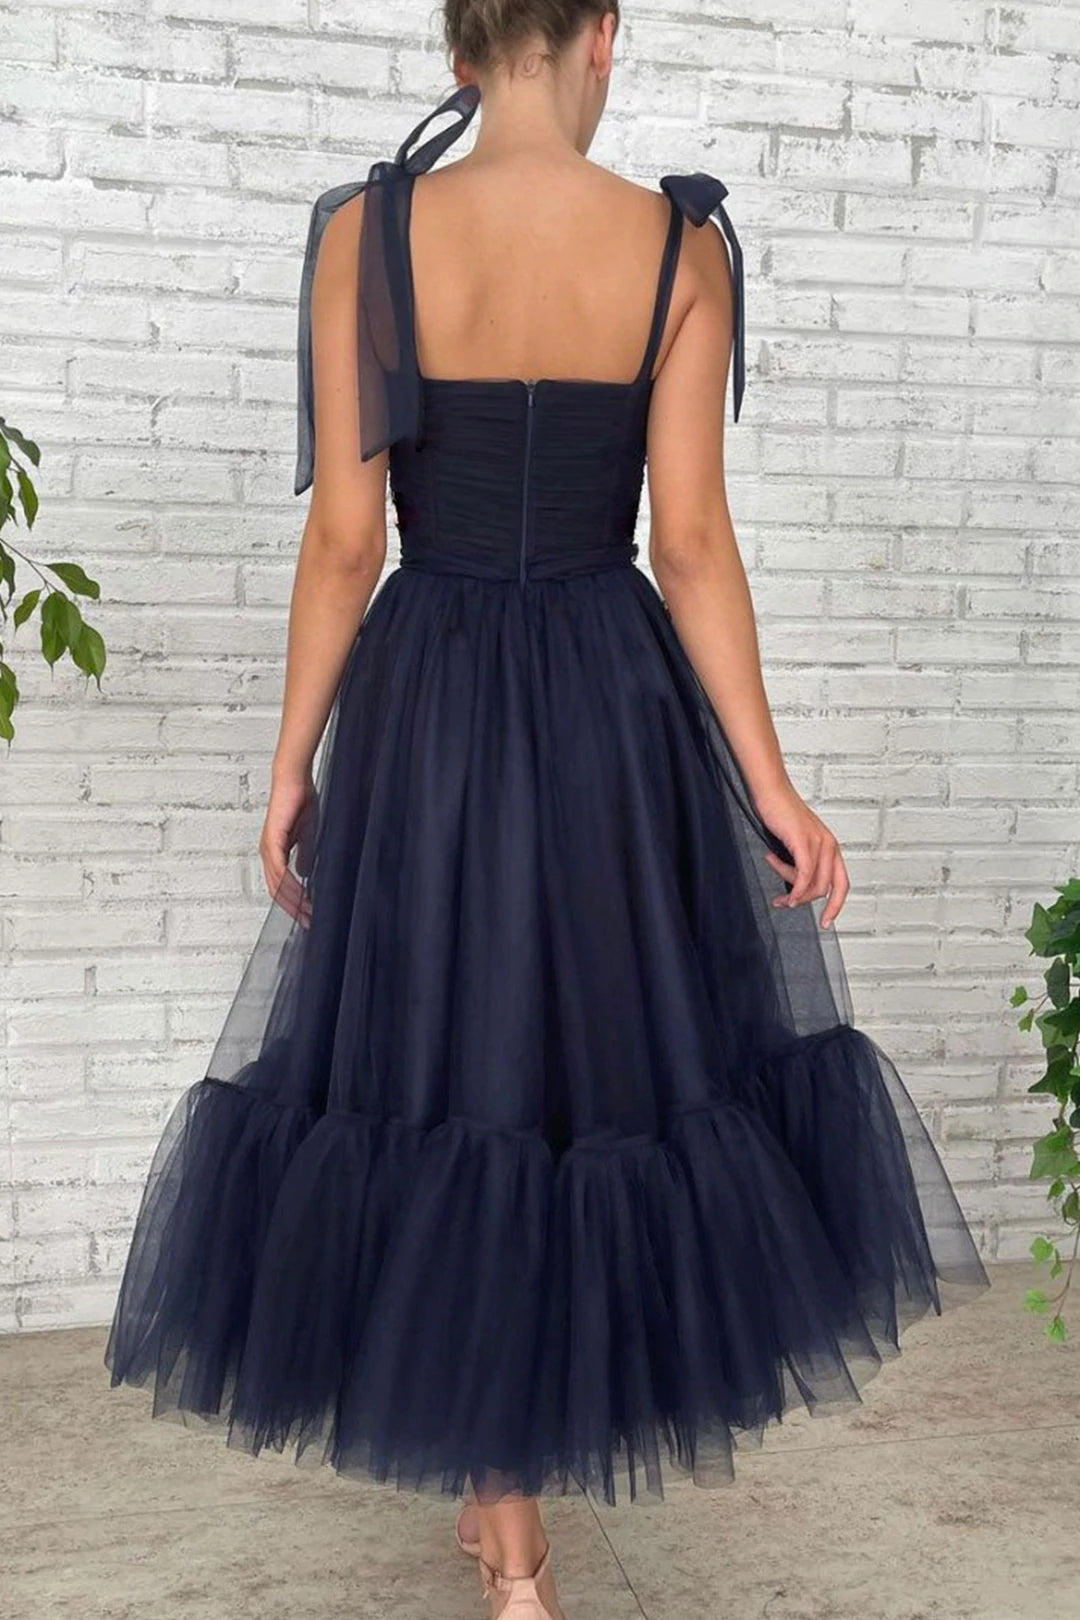 Blue Tulle Short A-Line Prom Dress, Cute Tulle Homecoming Party Dress